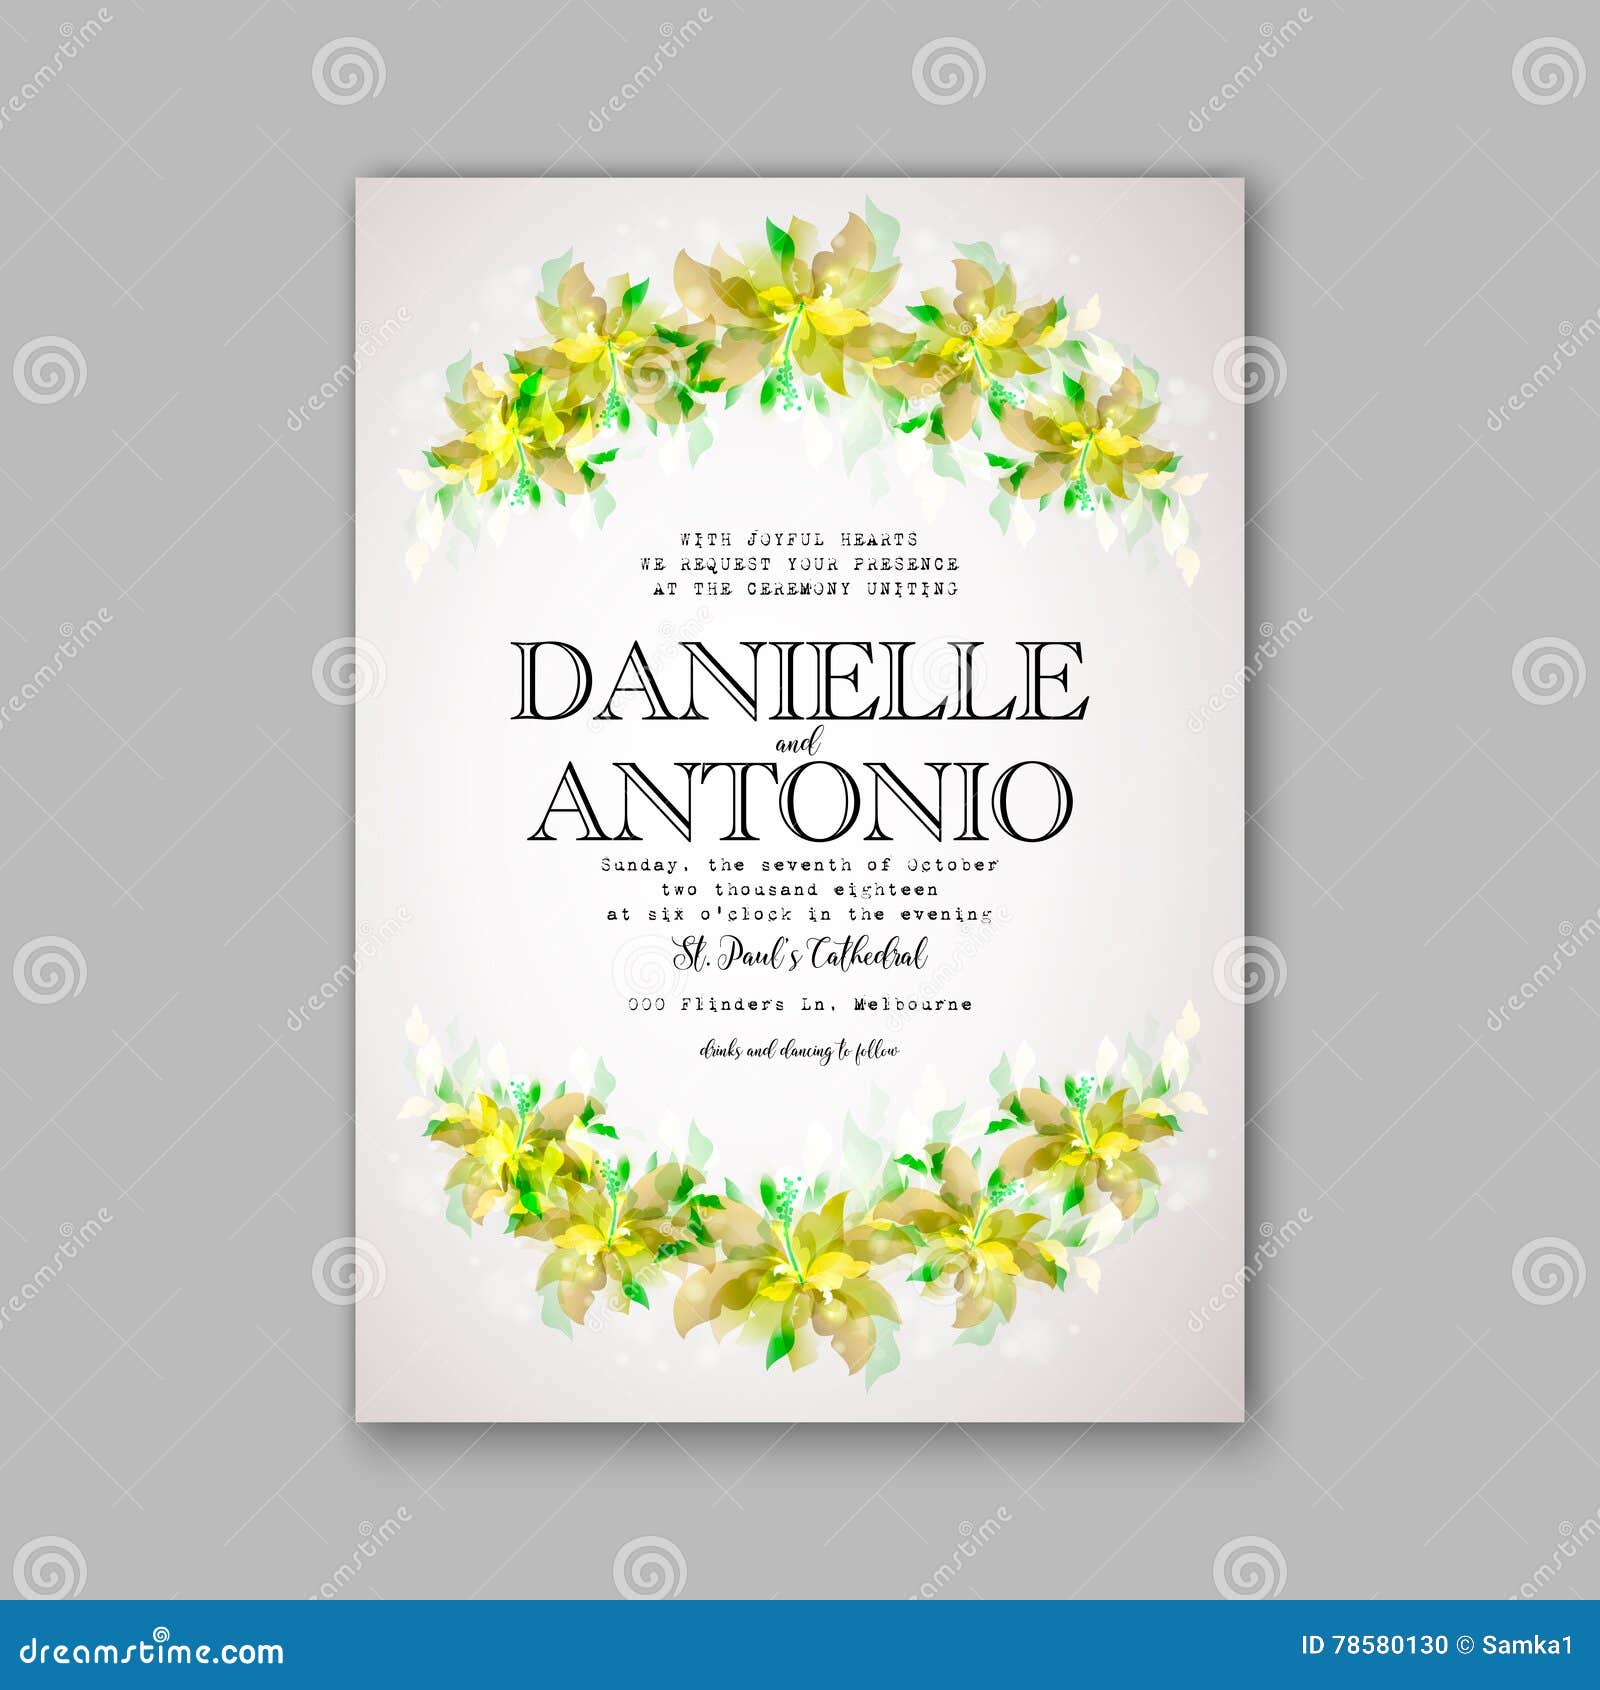 Wedding invitation template. Invitation or wedding card with abstract floral background.